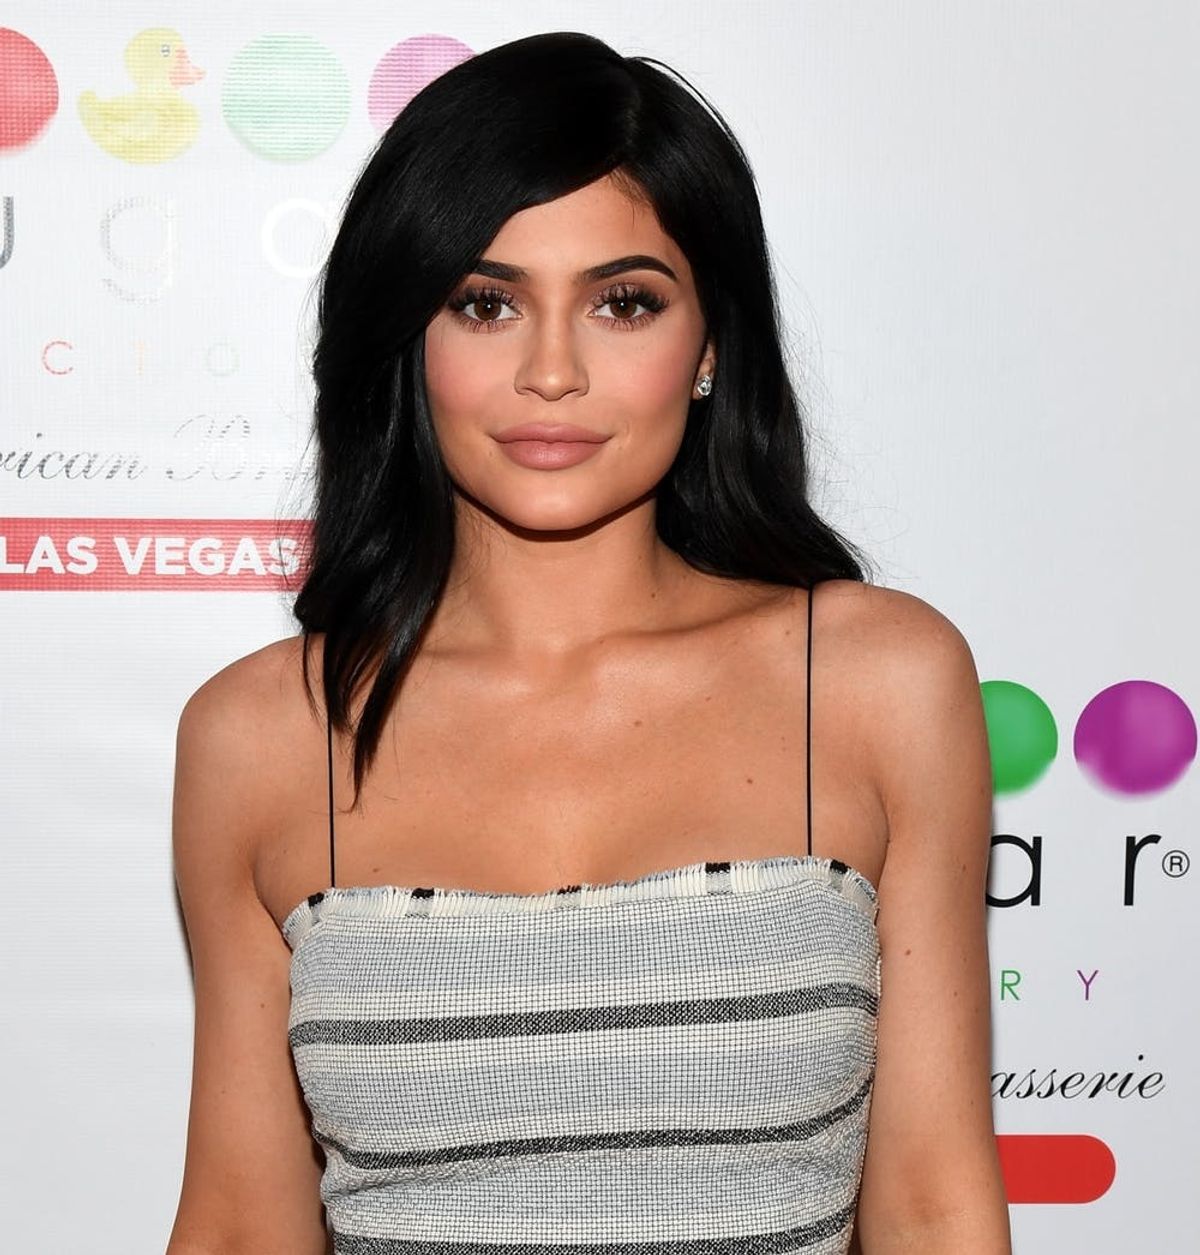 Kylie Jenner Makes Some Revealing Confessions While Playing ‘Never Have I Ever’